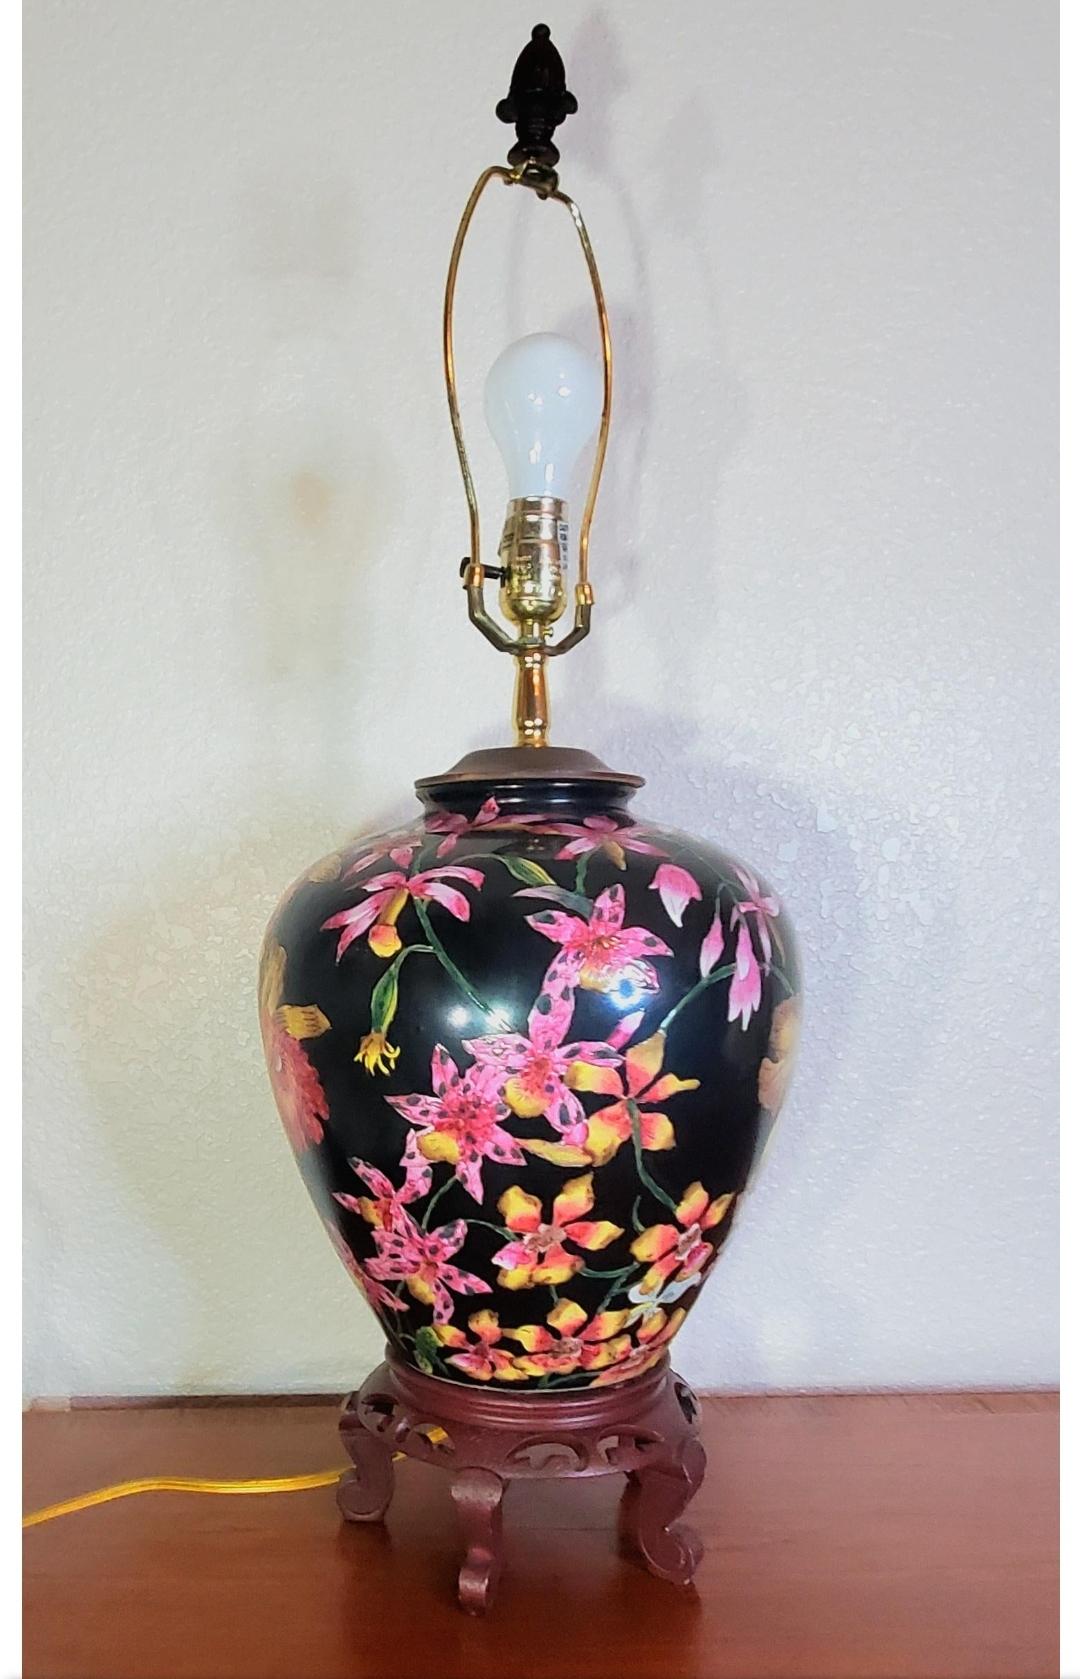 Stunning Chinese Hollywood regency ginger jar lamp.
Detailed, intricate vase includes irises and cherry blossoms.
Carved wood stand.

Looks like the ginger jar vase was made into a lamp in the 60s judging by the polarized cord.
30.5